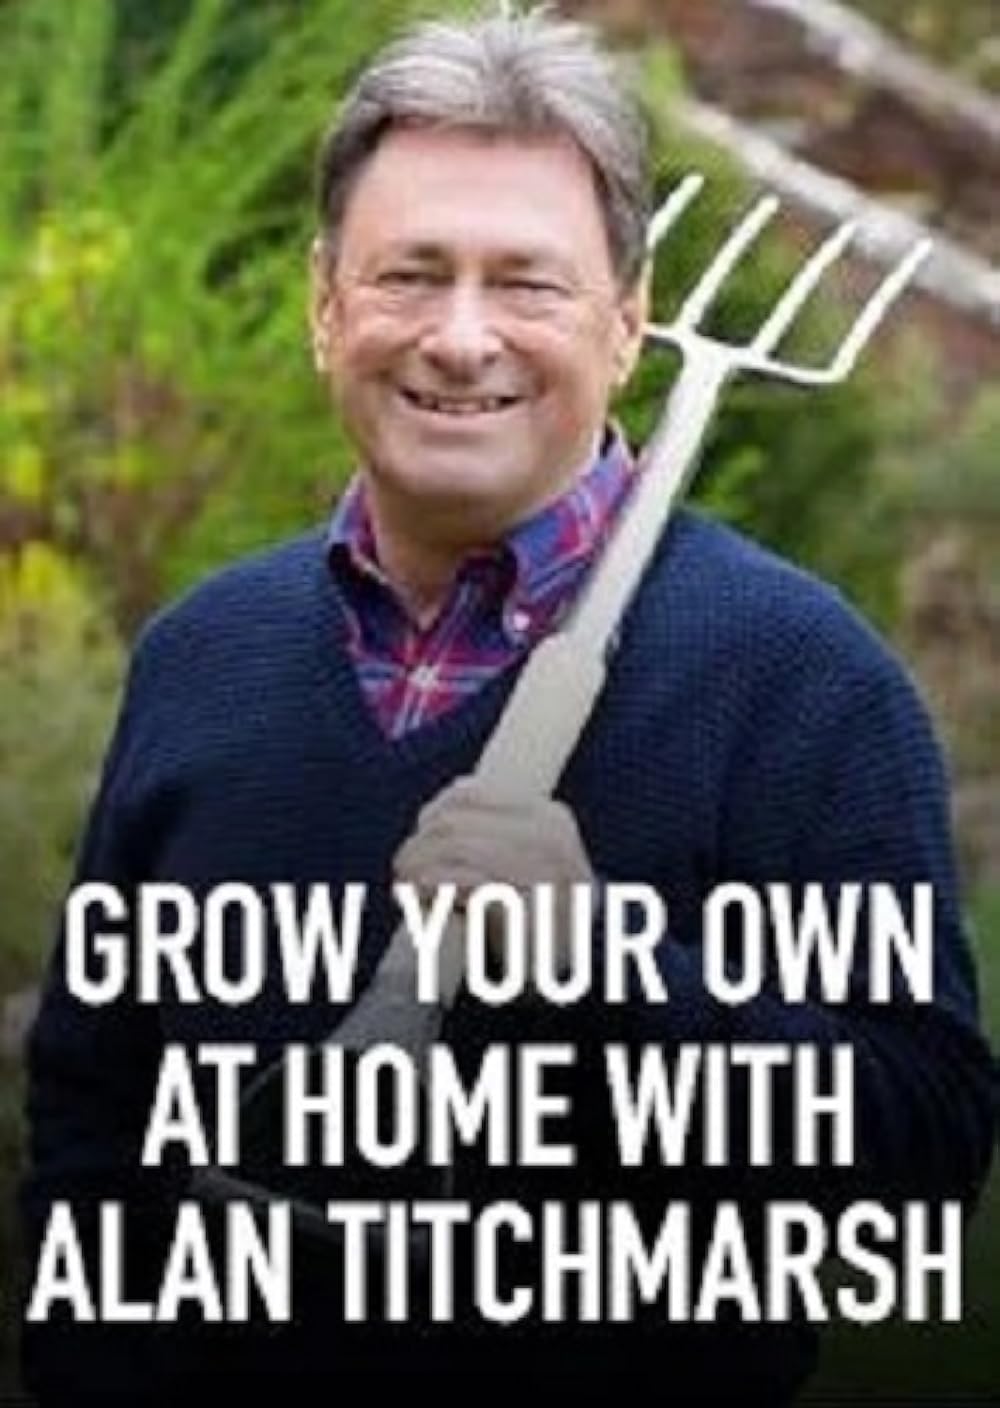 Grow Your Own at Home with Alan Titchmarsh